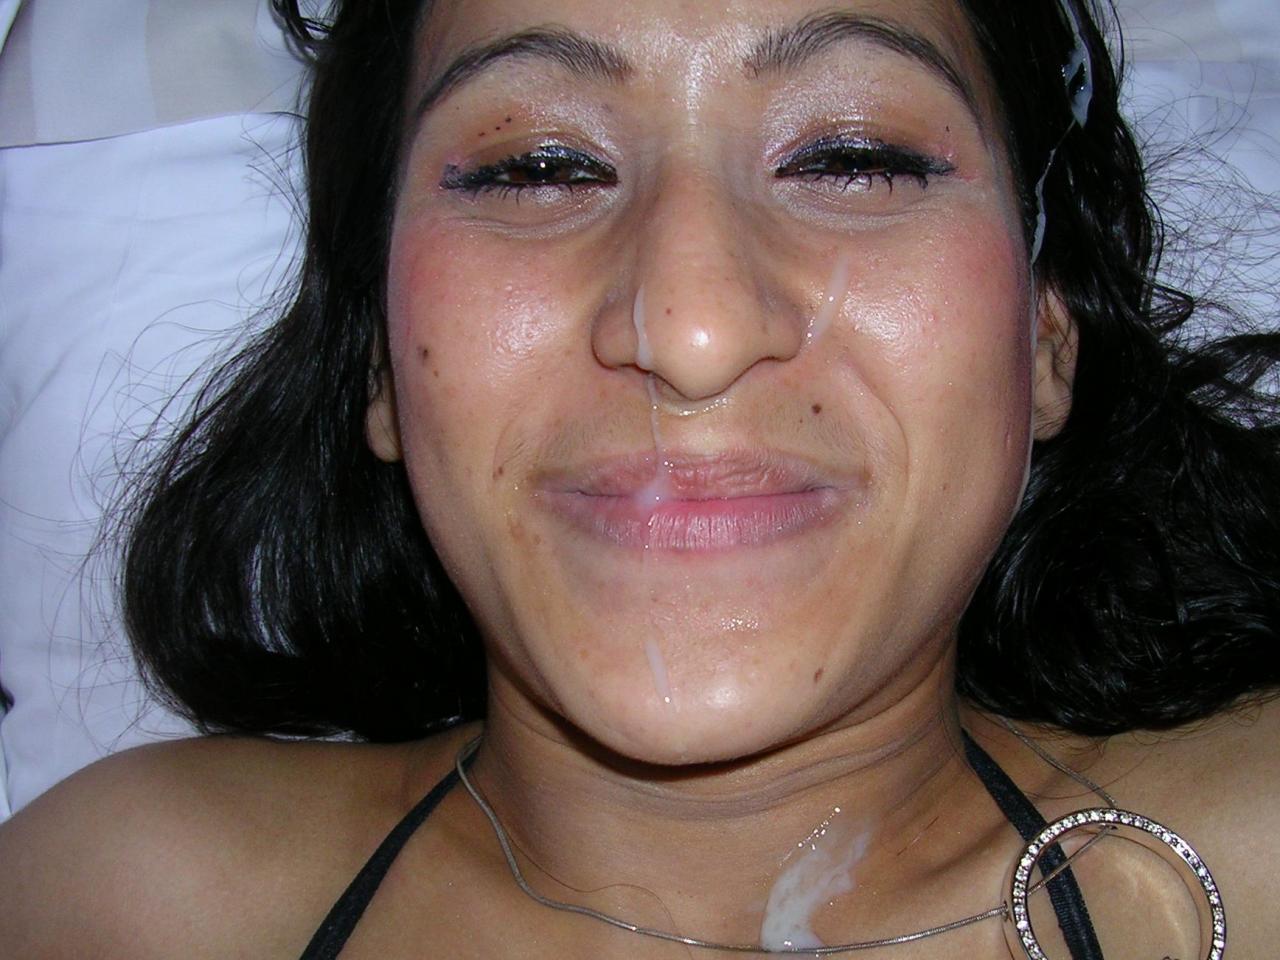 Mixed Set of Amateur Girlfriends with Pierced Tongue image